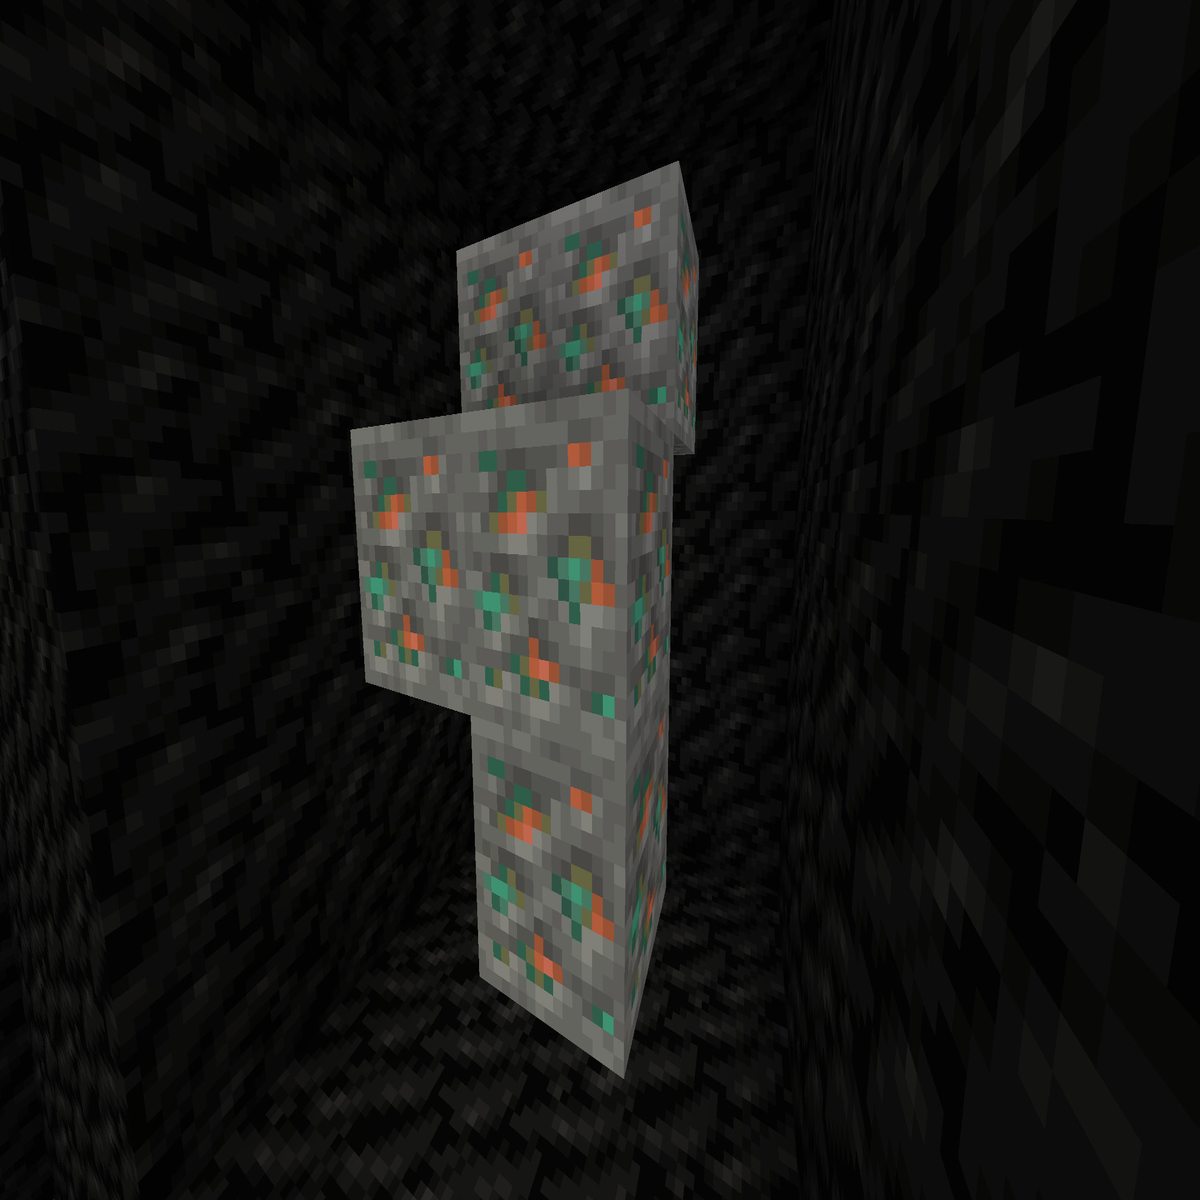 Old Ore Textures (With Copper) - Minecraft Resource Pack